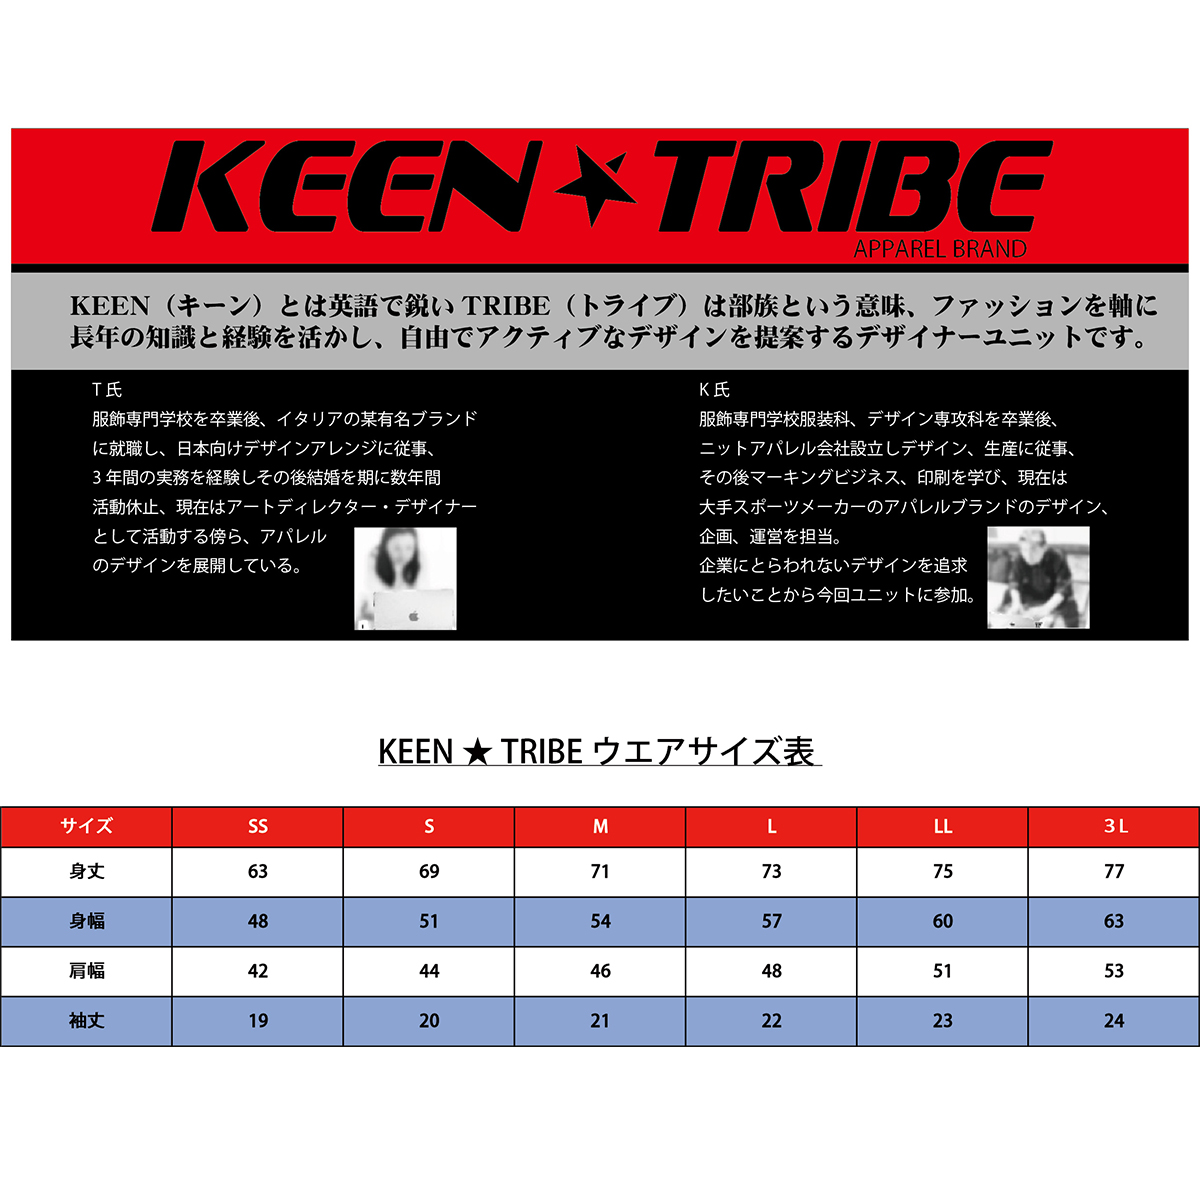 KEEN ★ TRIBE　KT-61(受注生産)